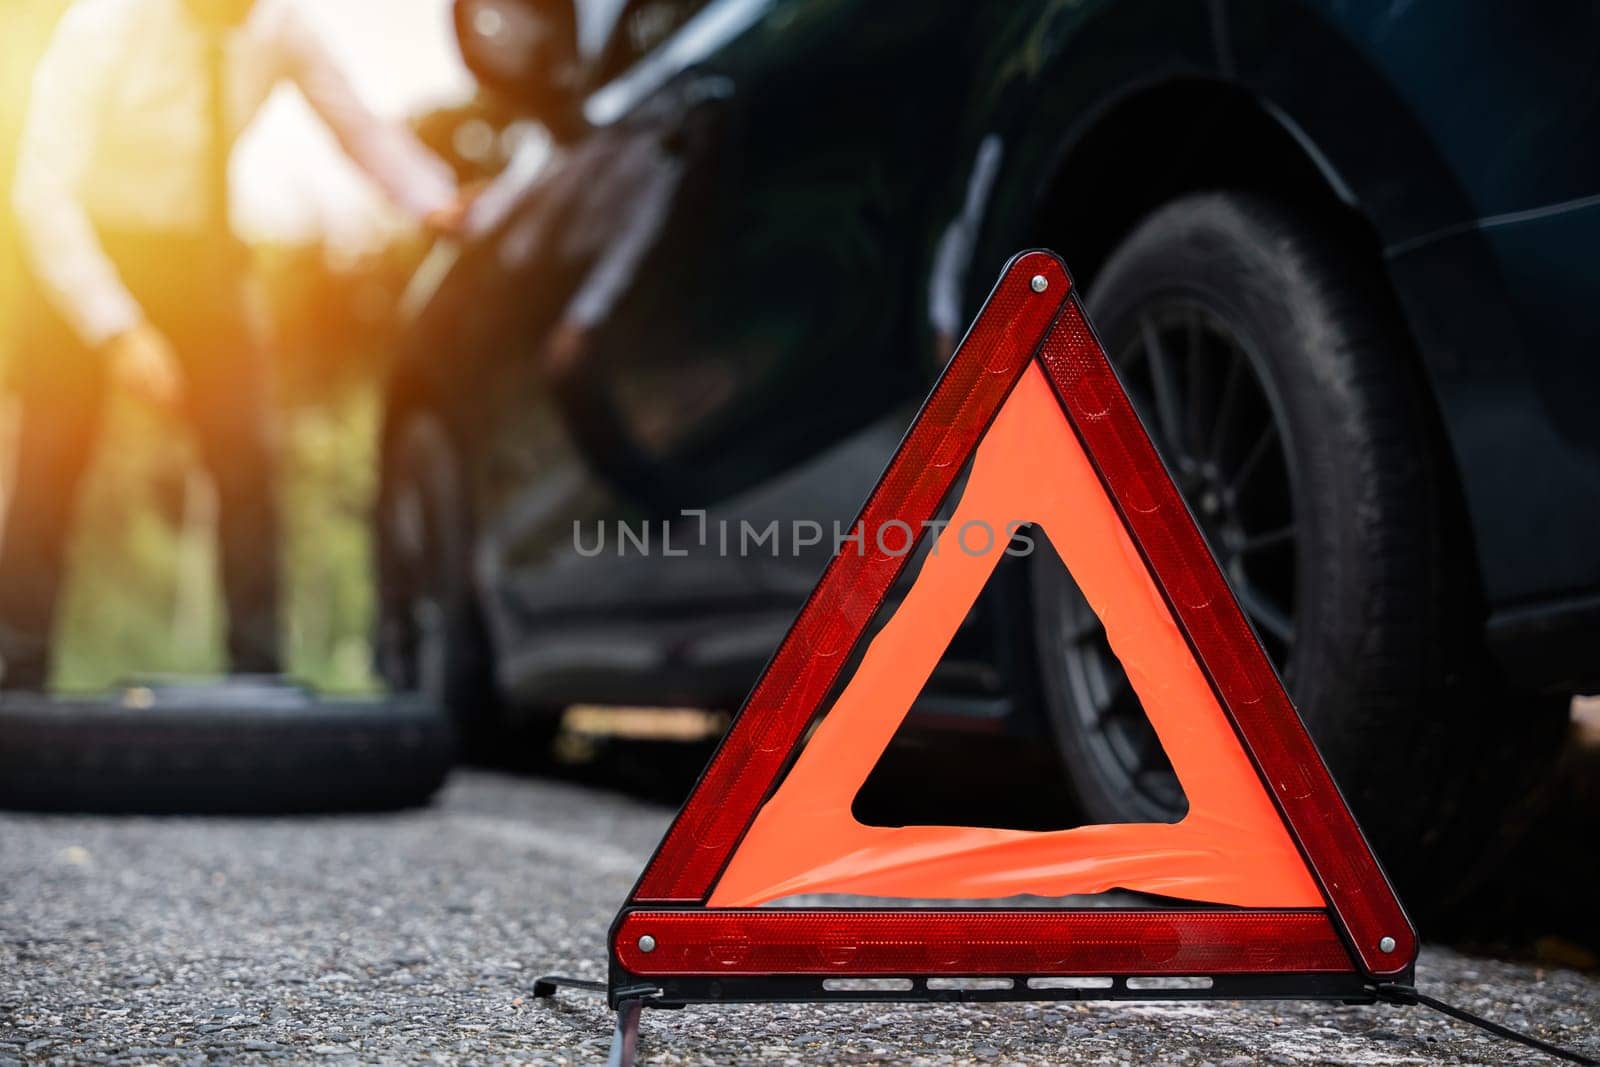 Businessman stranded on the road with a broken car and a warning triangle sign. Repairing the car wheel while waiting for roadside assistance. Concept of transportation problems and emergency support.